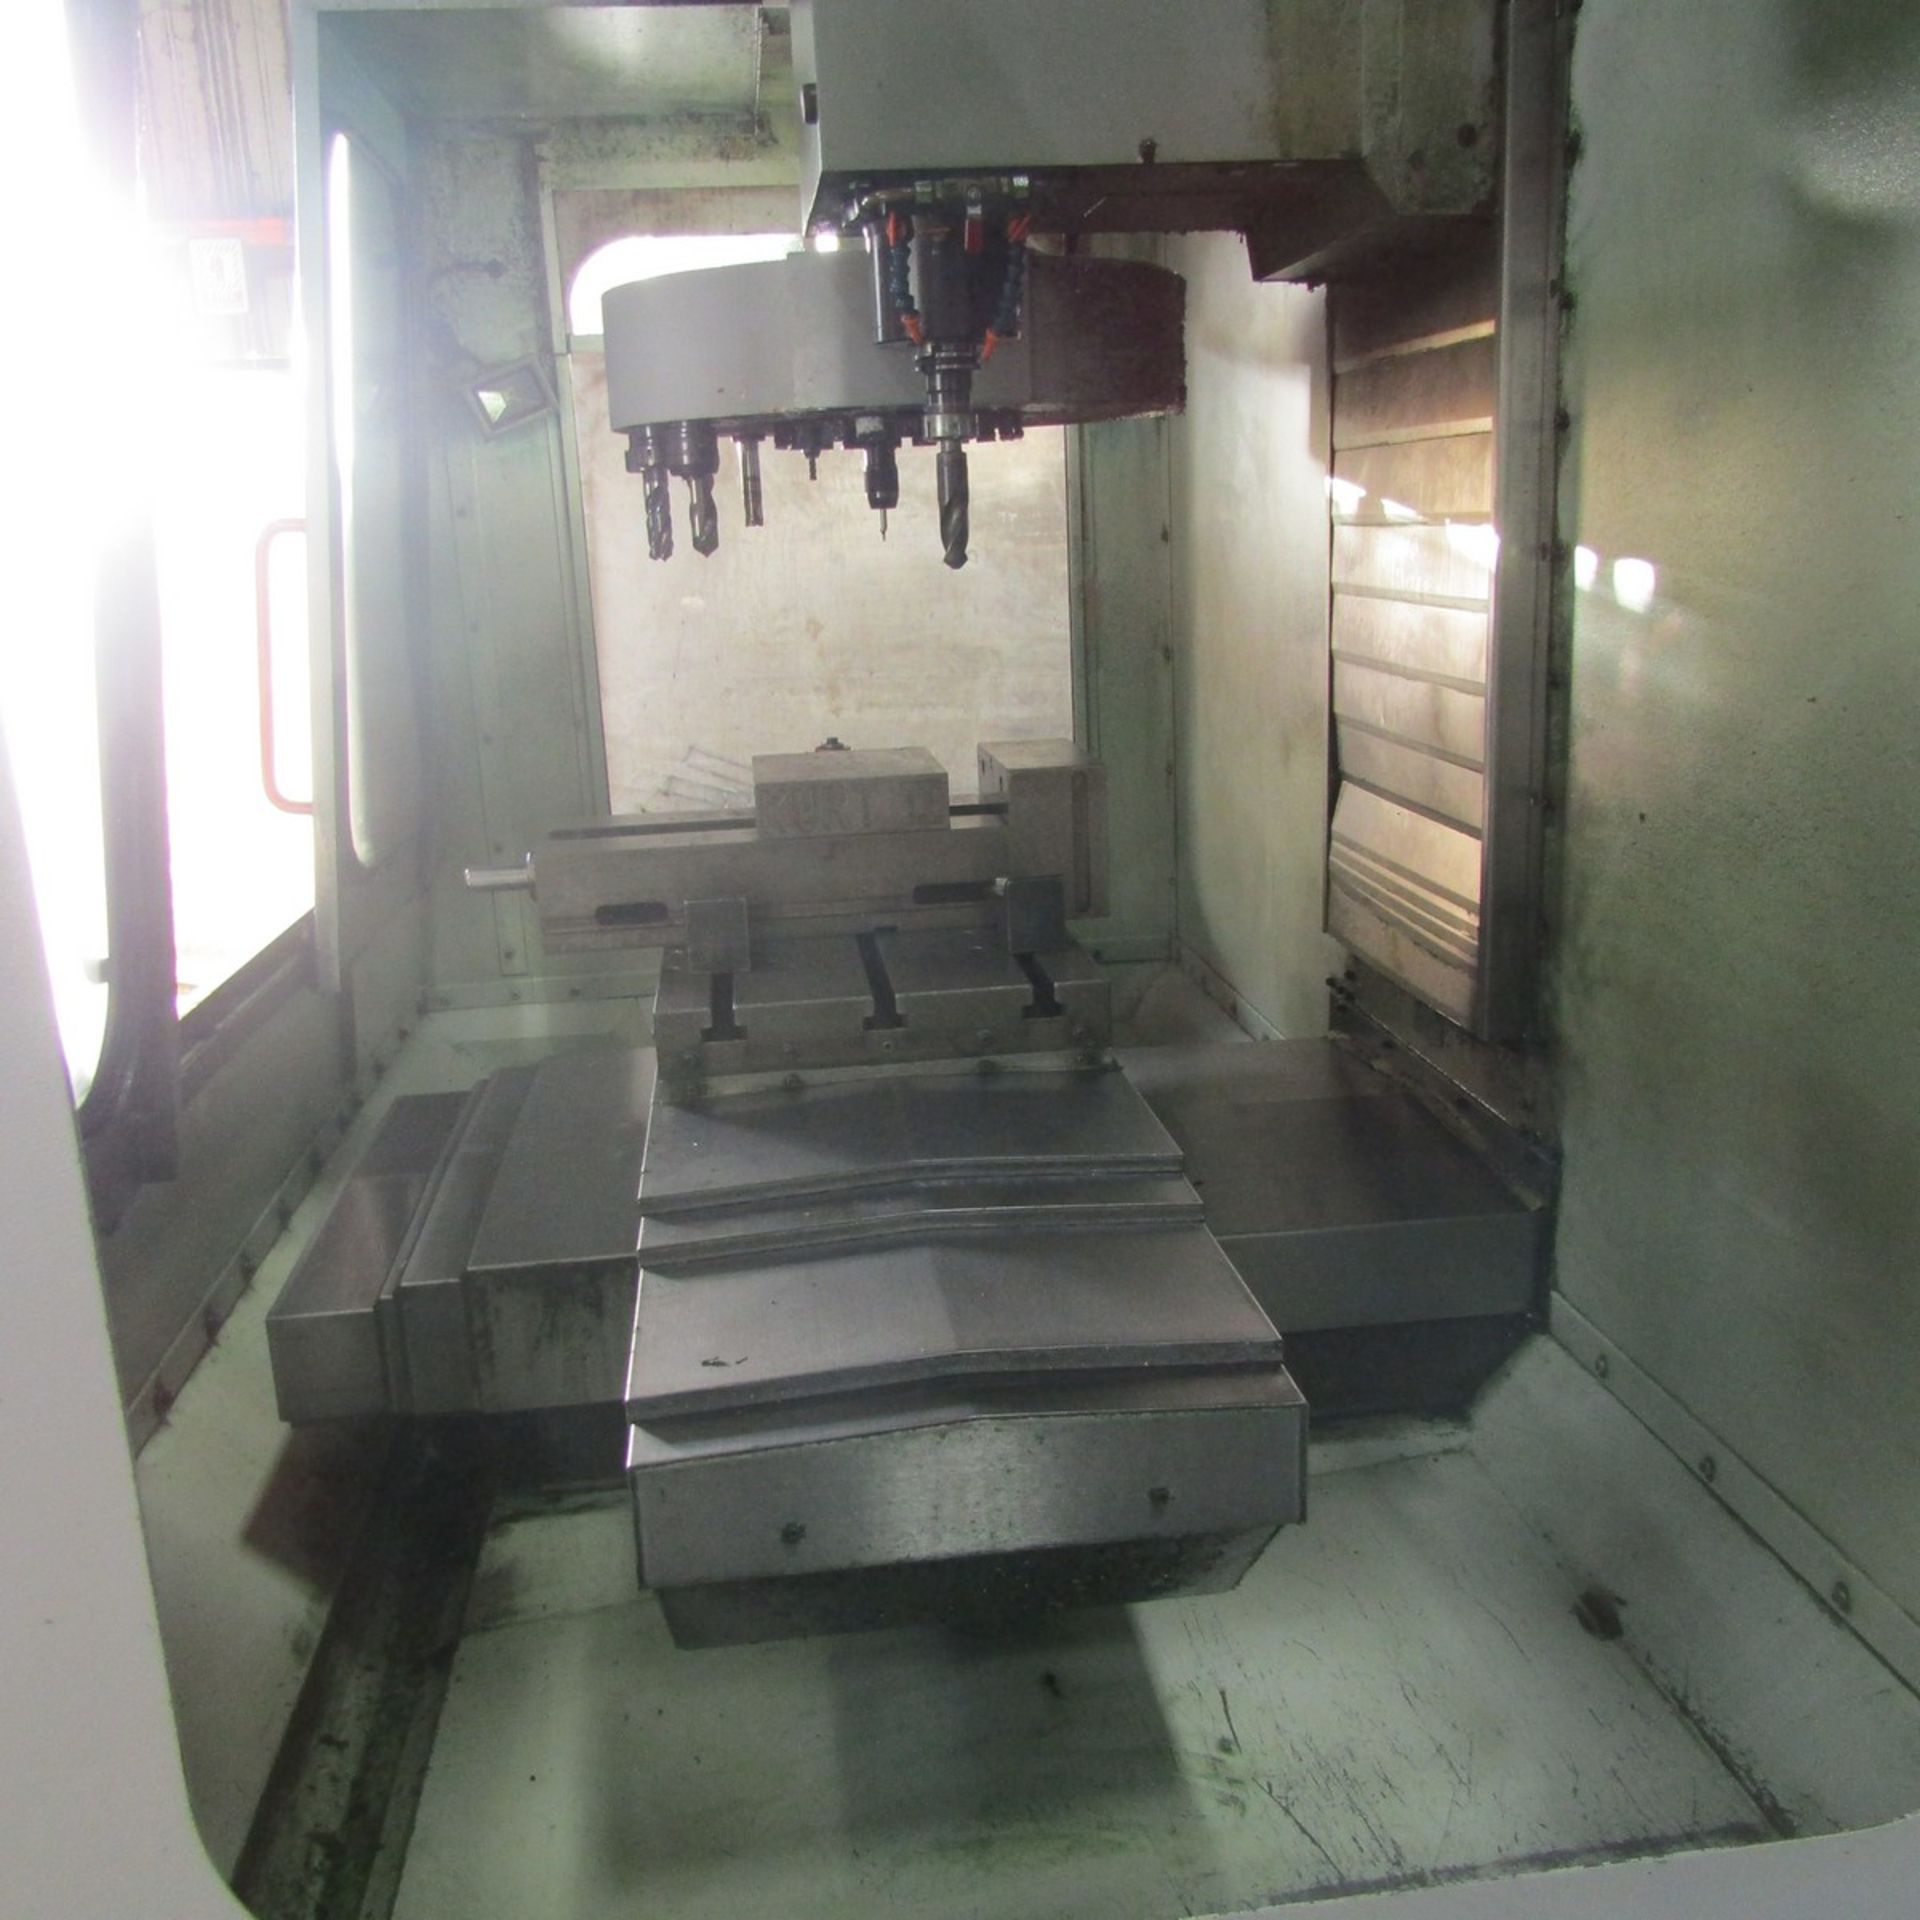 1995 Haas, Mdl: VF-1 Vertical Machining Center 20 ATC, 14" x 26" T-Slotted Table, 8" Kurt II Machine - Image 5 of 8